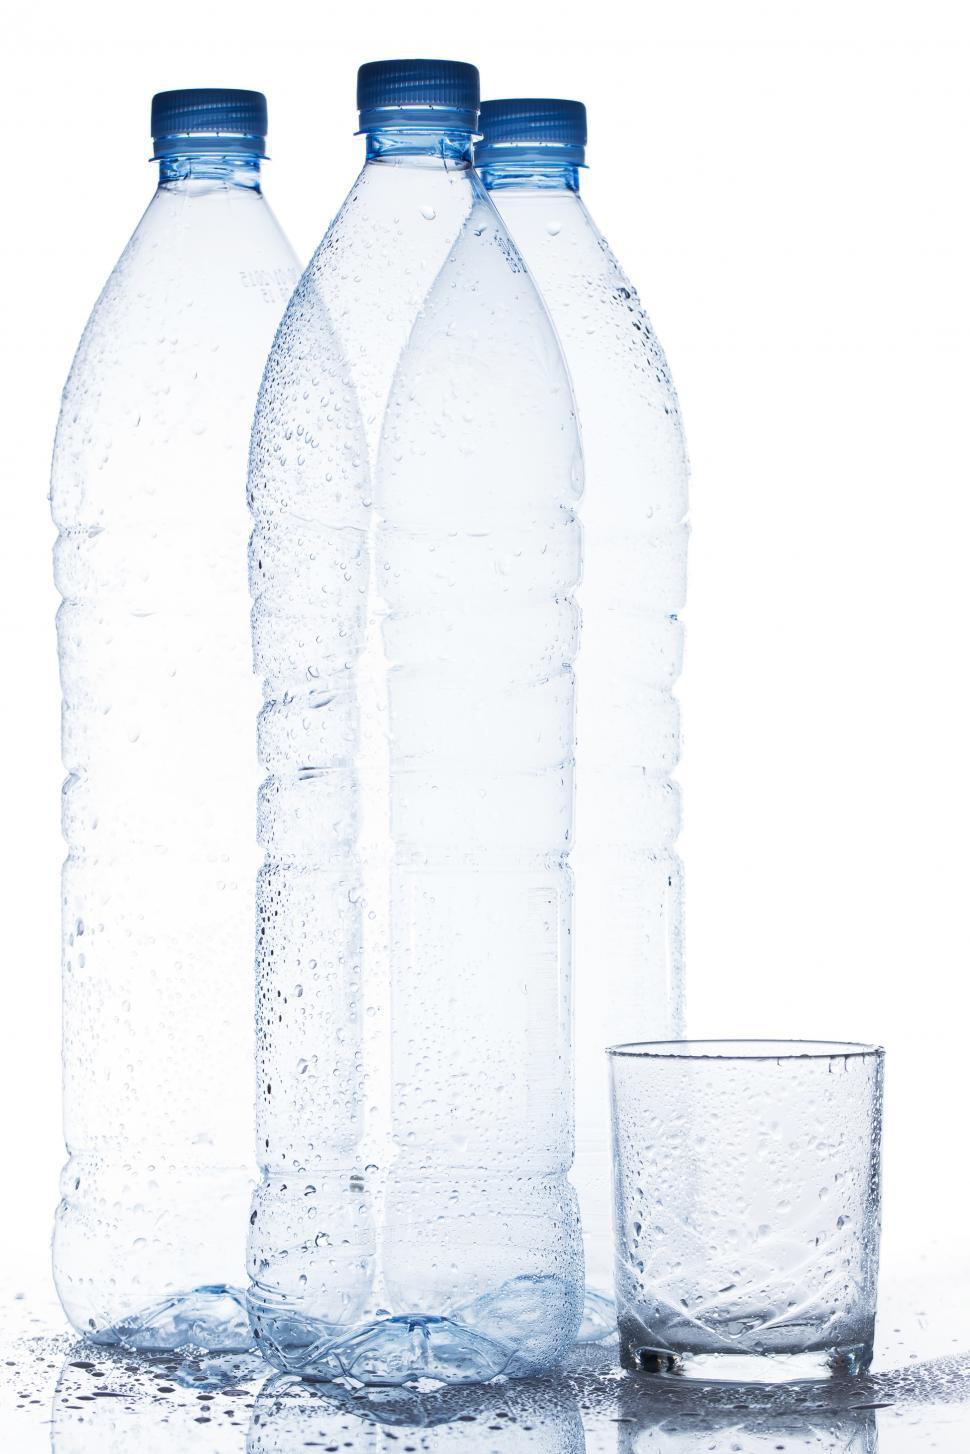 Free Image of Empty water bottles with water glass 